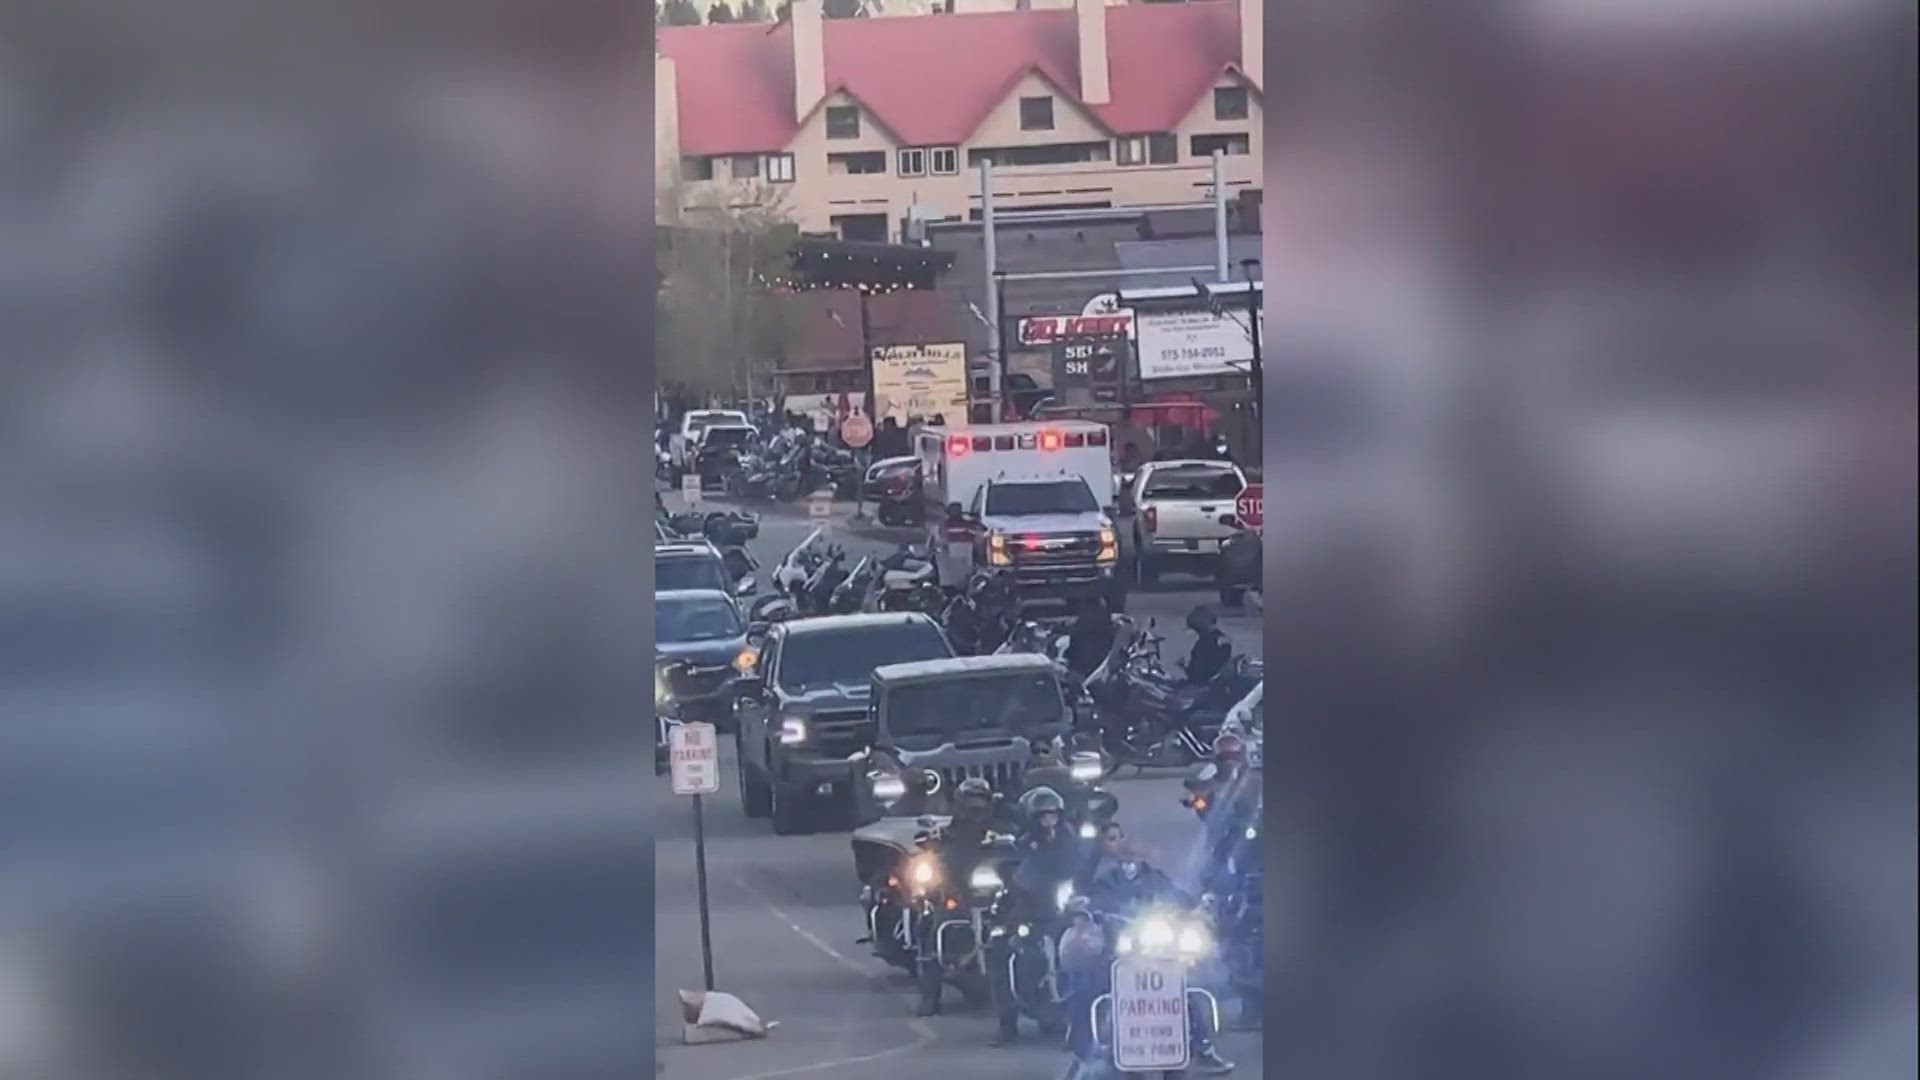 A total of eight people were hurt during a shooting at a motorcycle rally in Red River, New Mexico.